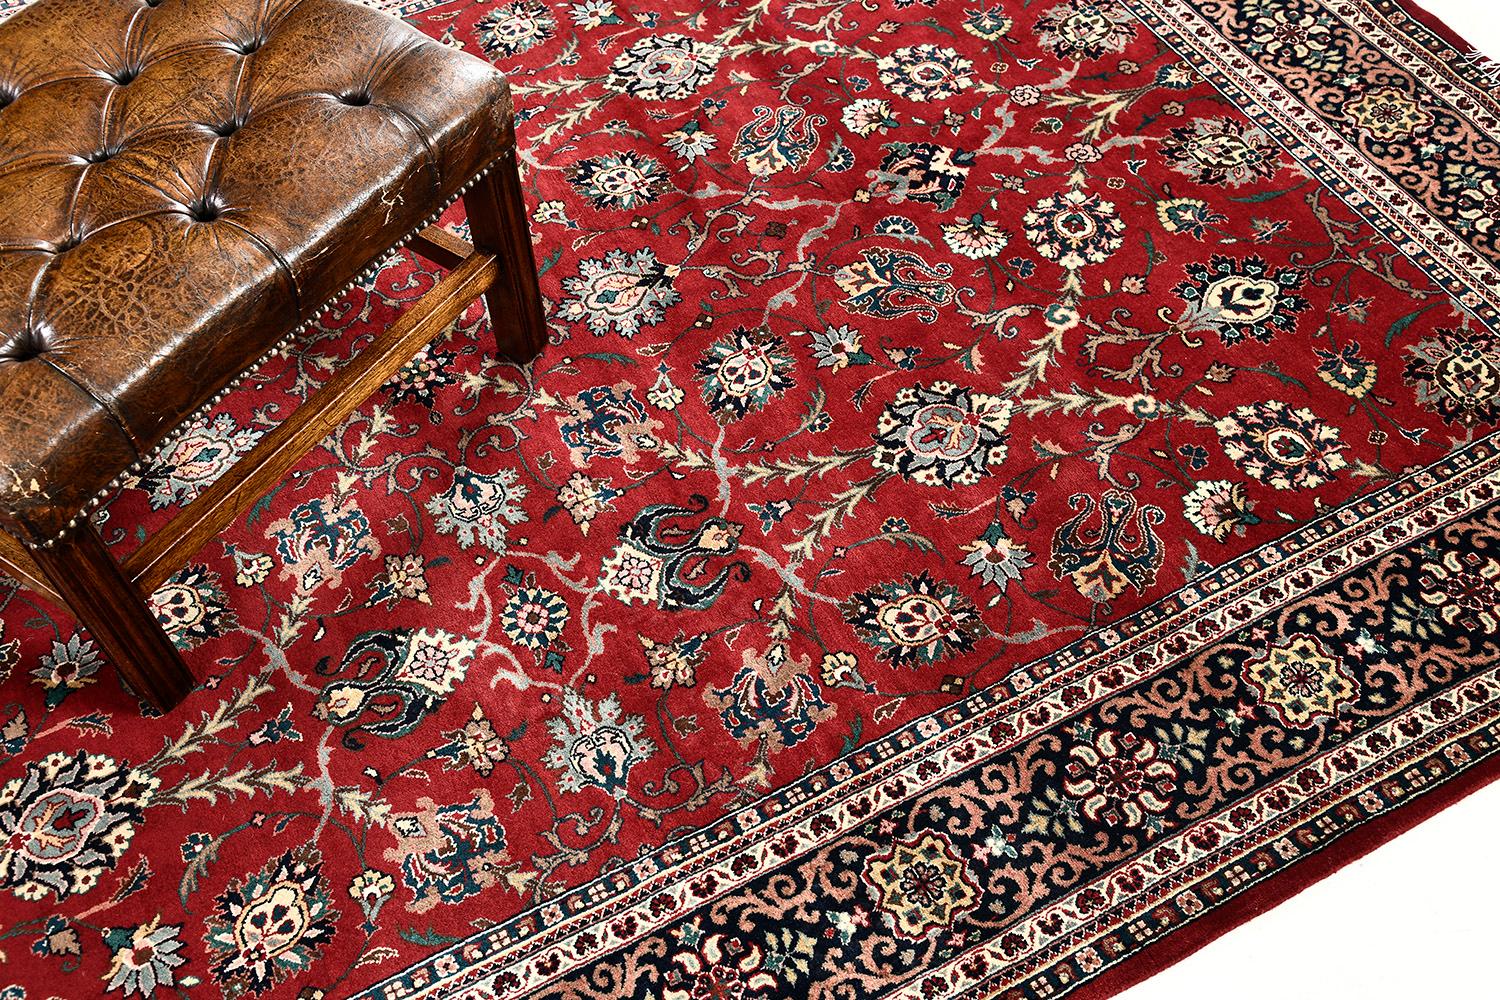 More plausible to a majestic theme, this magnificent Indo Semnan Rug encompasses a sophisticated pattern. This masterpiece is aligned with each other in that these spirals and vines are perfectly matched over in a blushing vibrant red. A home decor